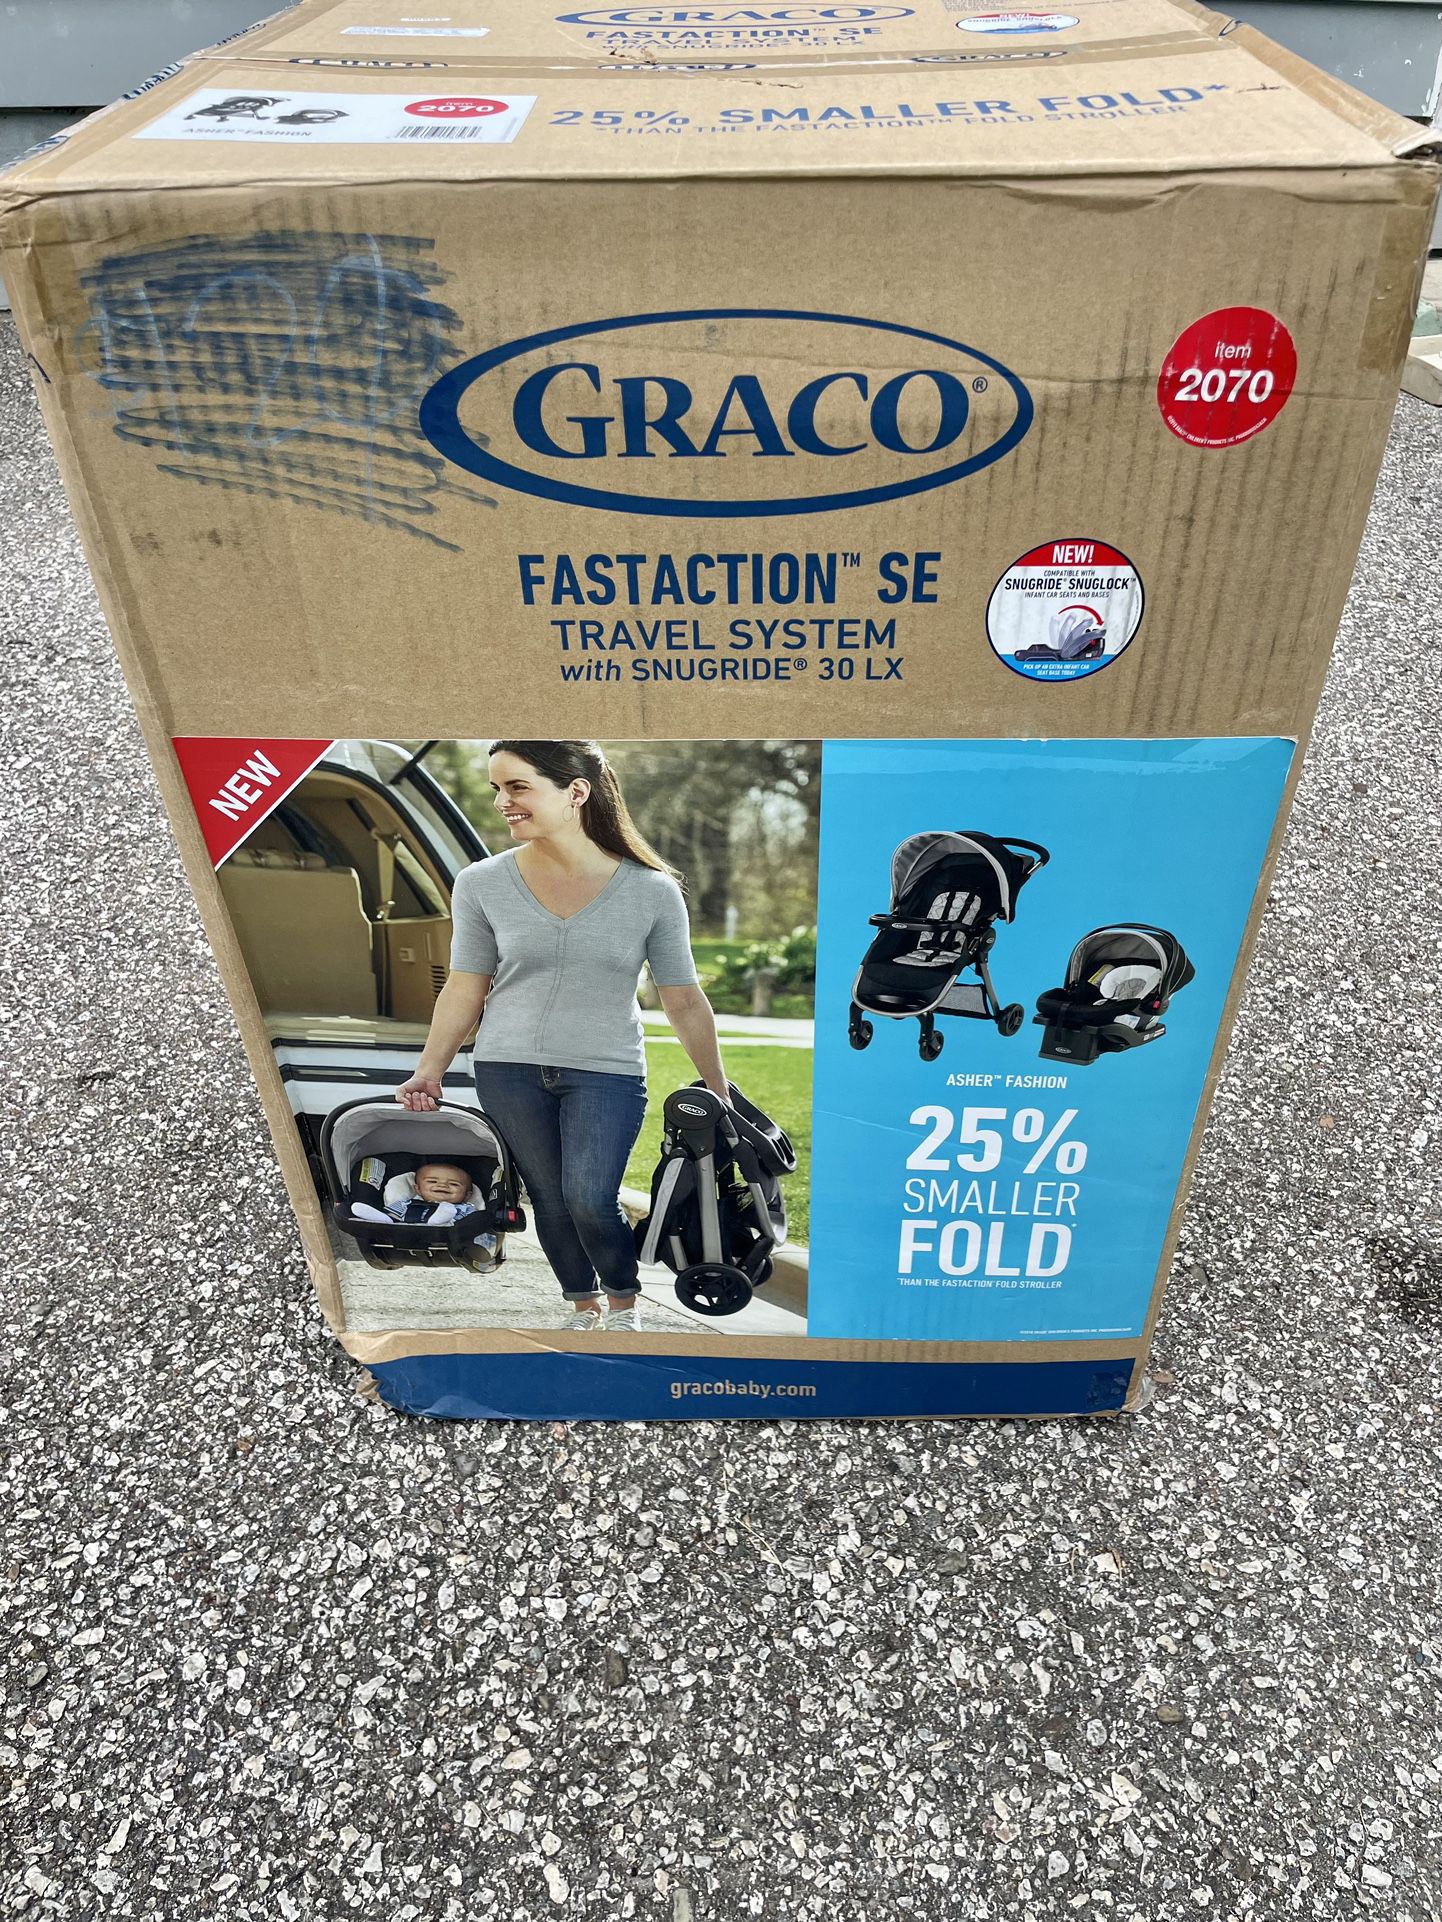 Brand New Never Opened Graco Asher fashion 